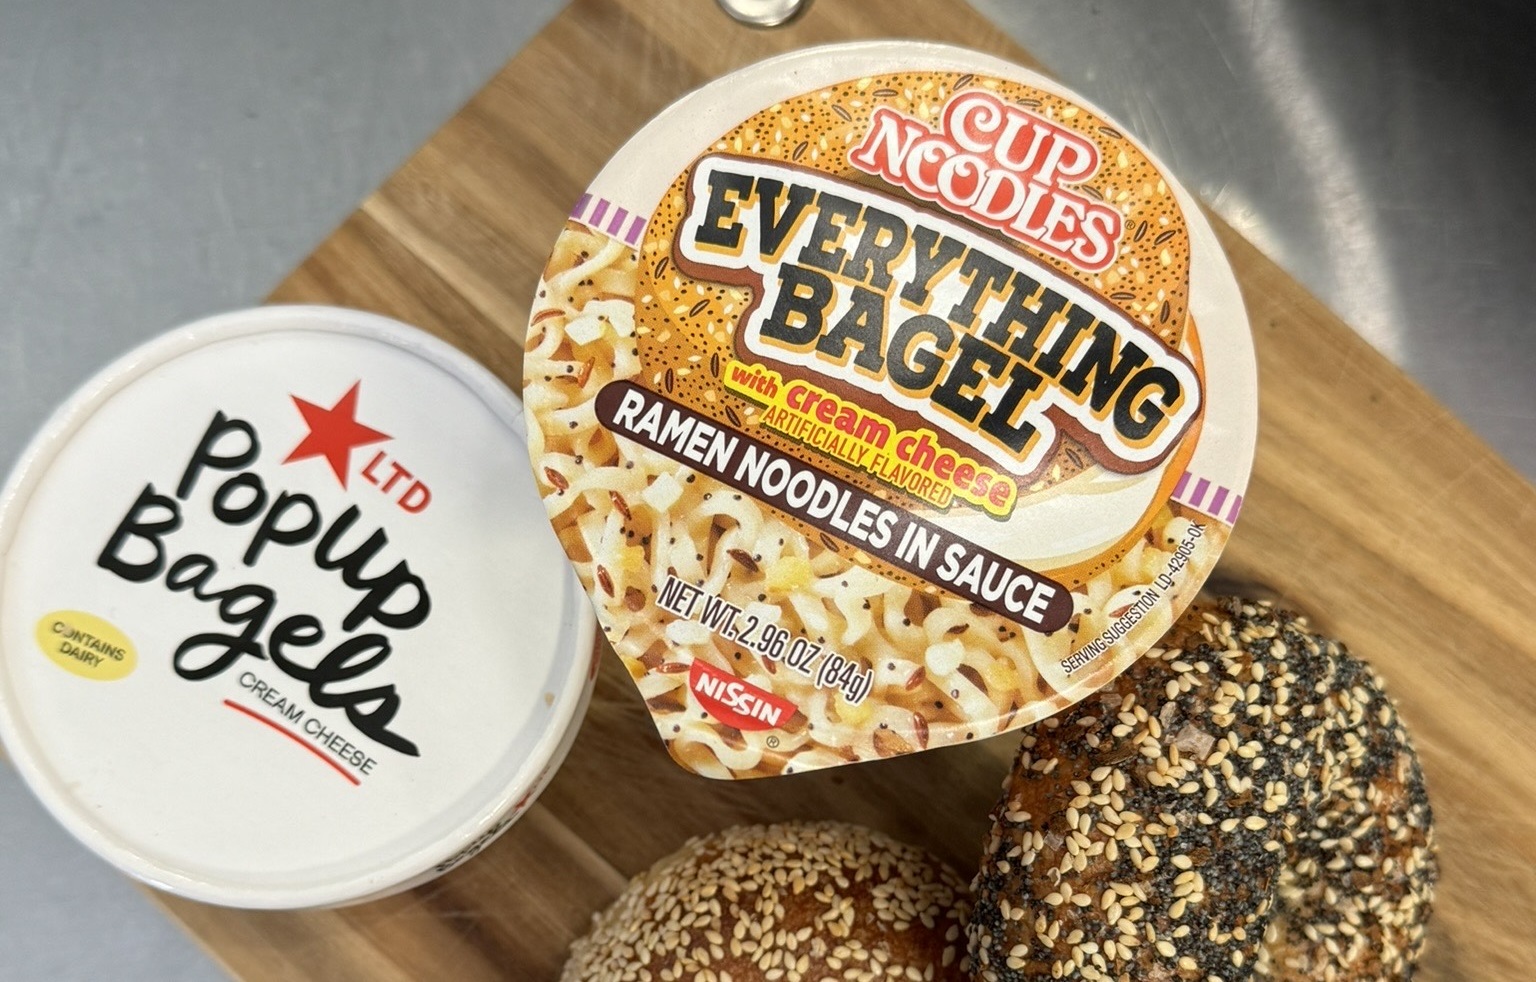 PopUp Bagels just launched limited-edition Cup Noodles cream cheese